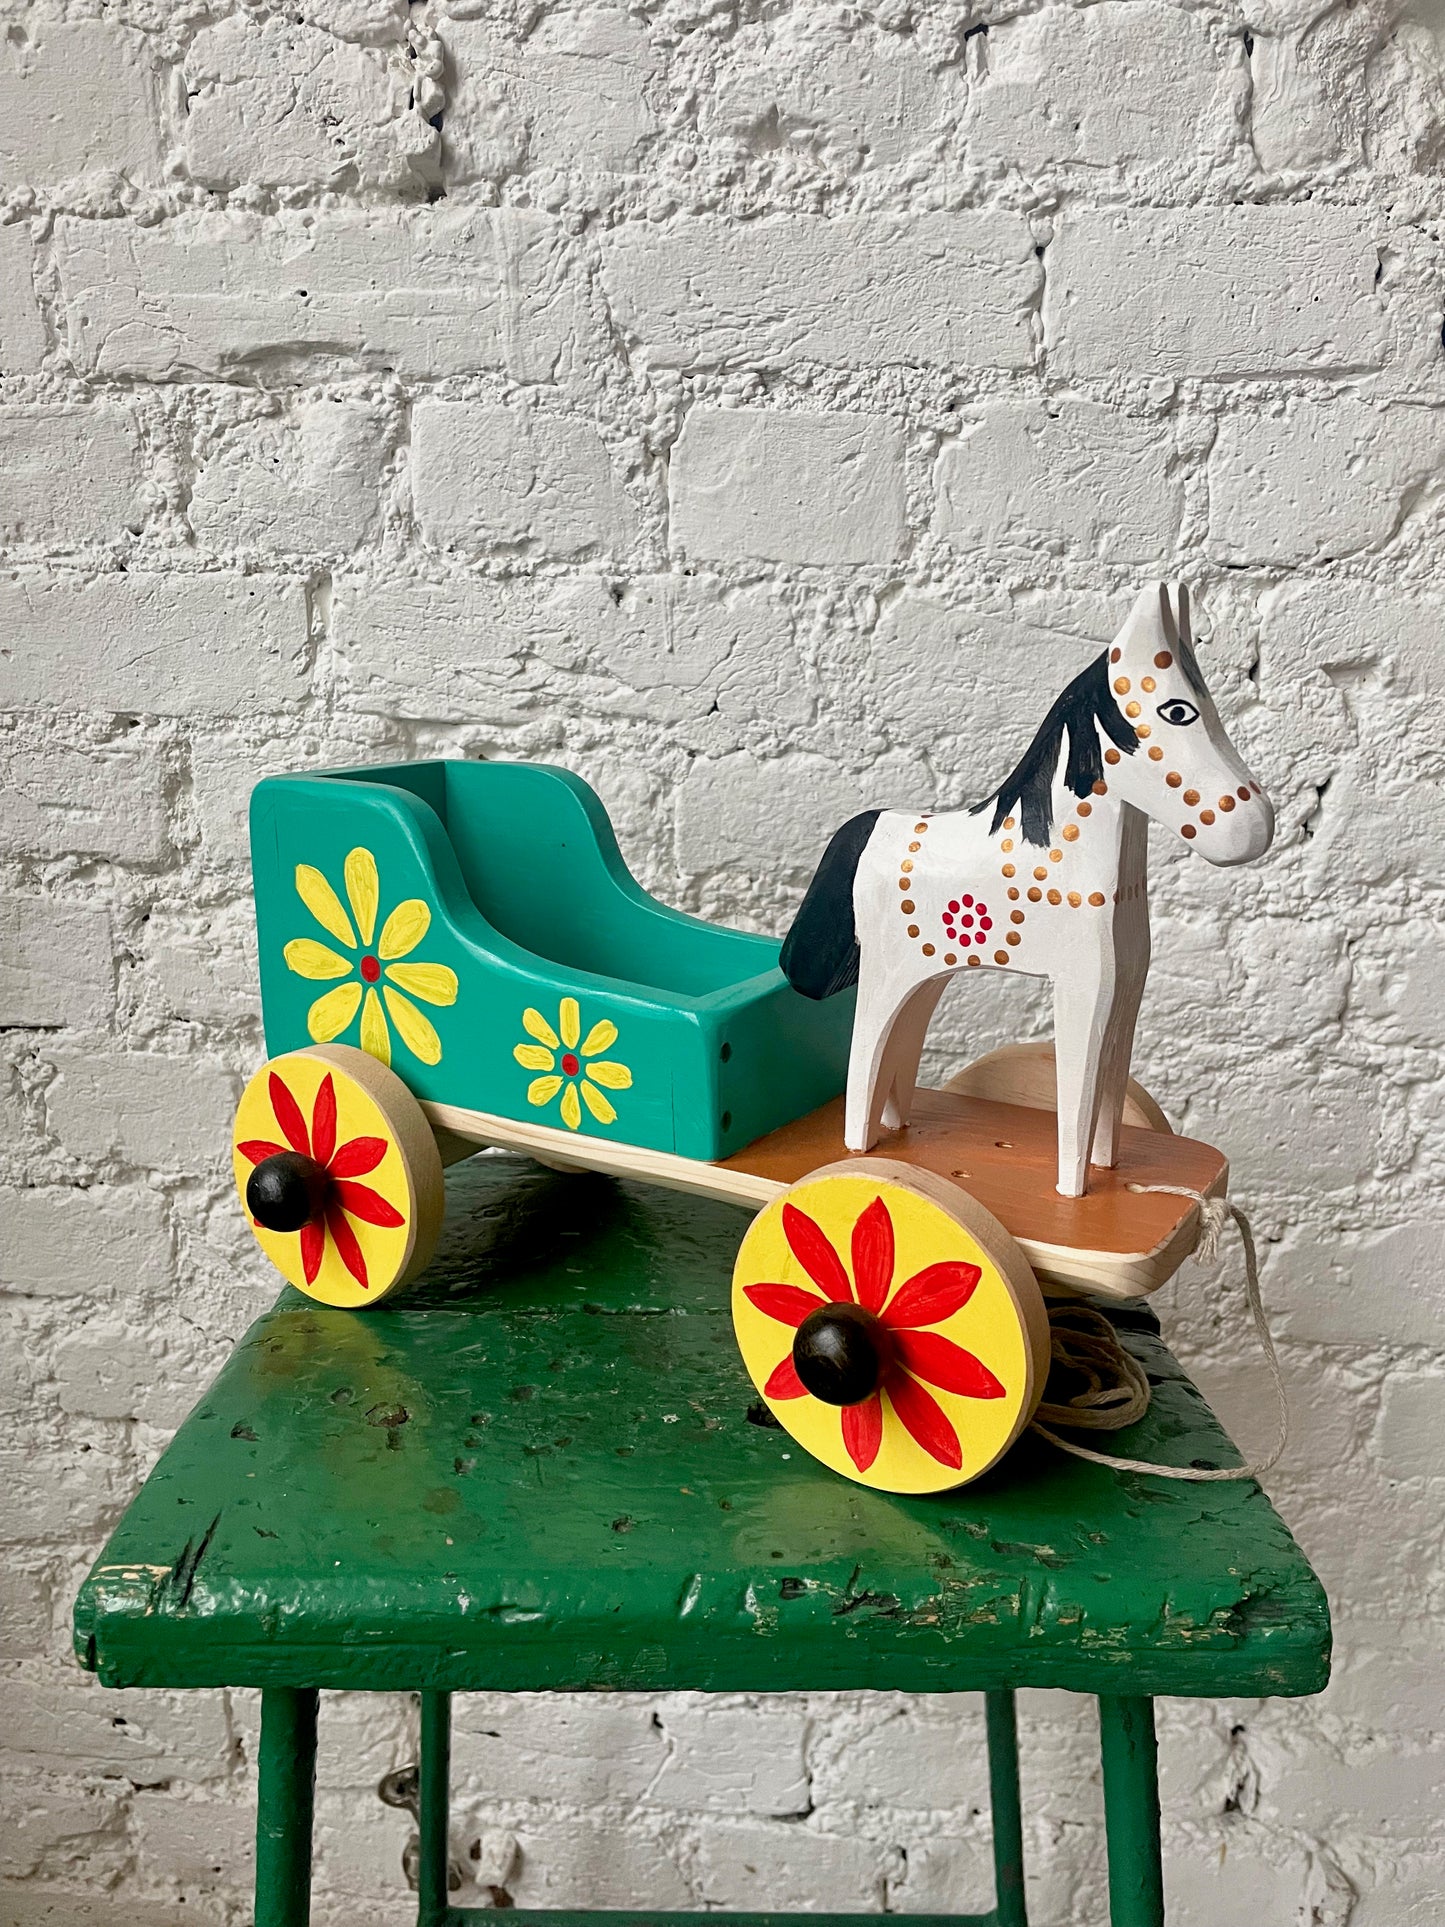 White Horse with Cart Toy by Krzysztof